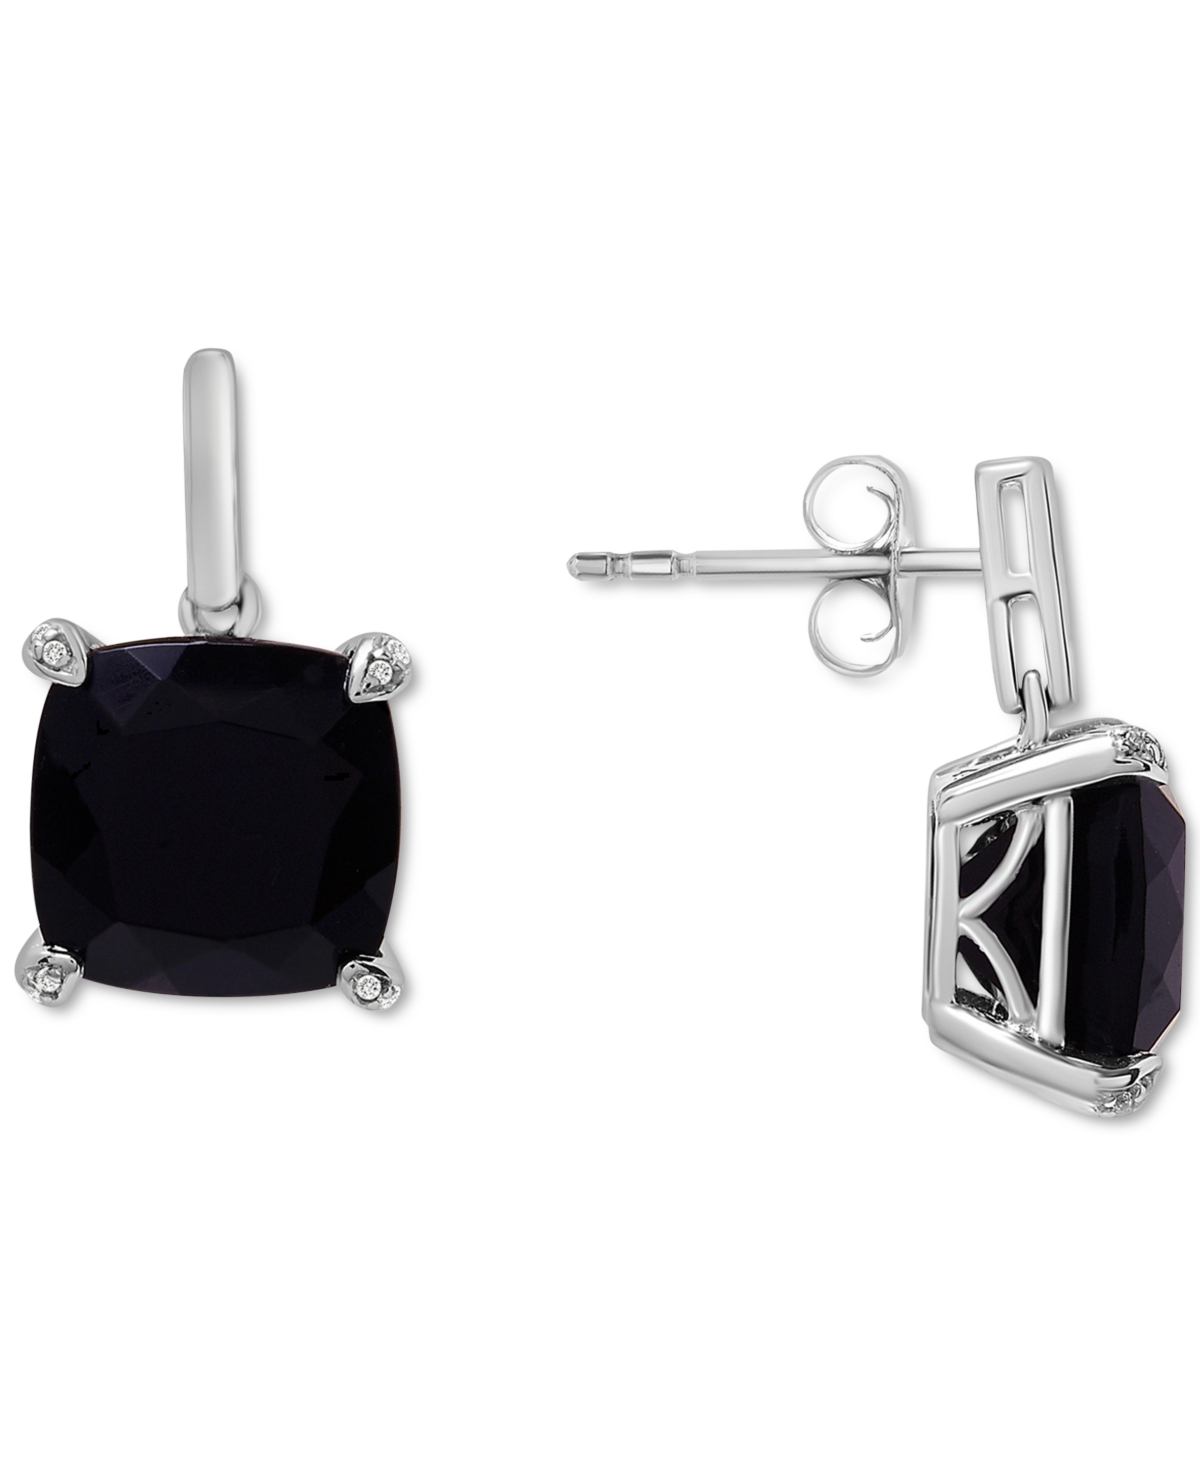 Onyx & Diamond Accent Drop Earrings in 14k Gold-Plated Sterling Silver - Sterling Silver